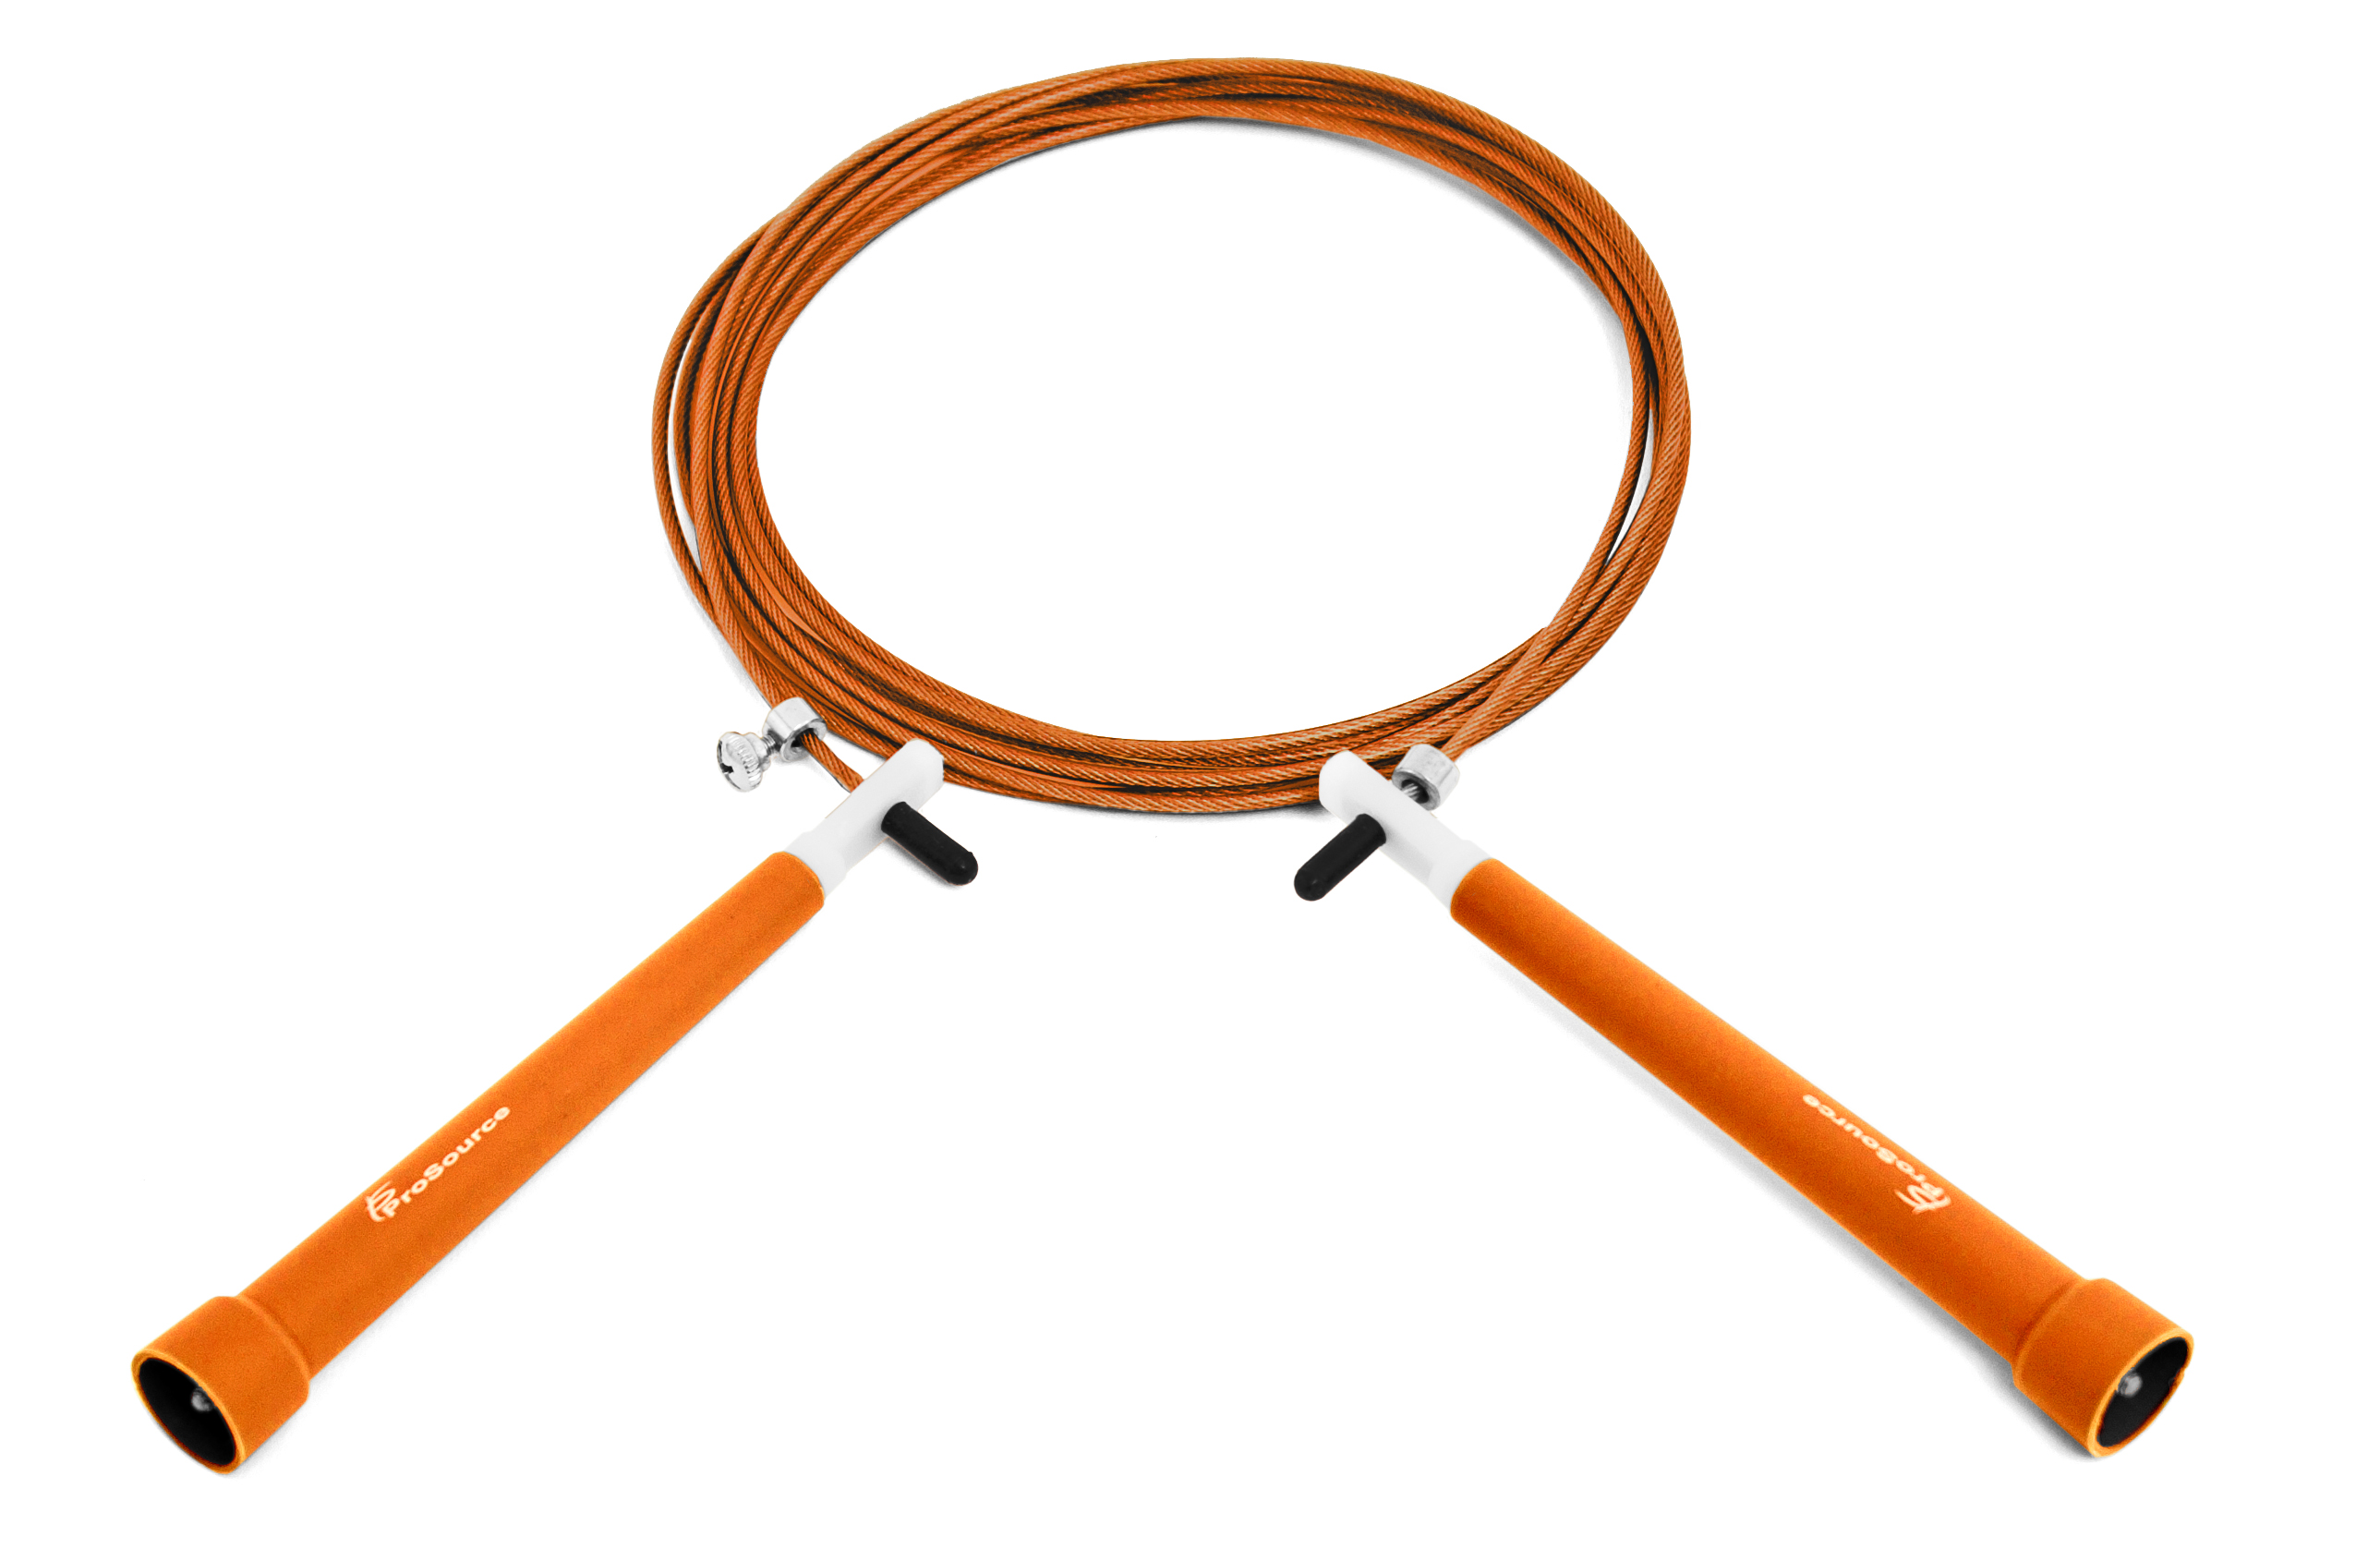 ProsourceFit Speed Jump Rope 10’ Fully Adjustable Super Fast Turning for Crossfit Cardio Boxing Orange